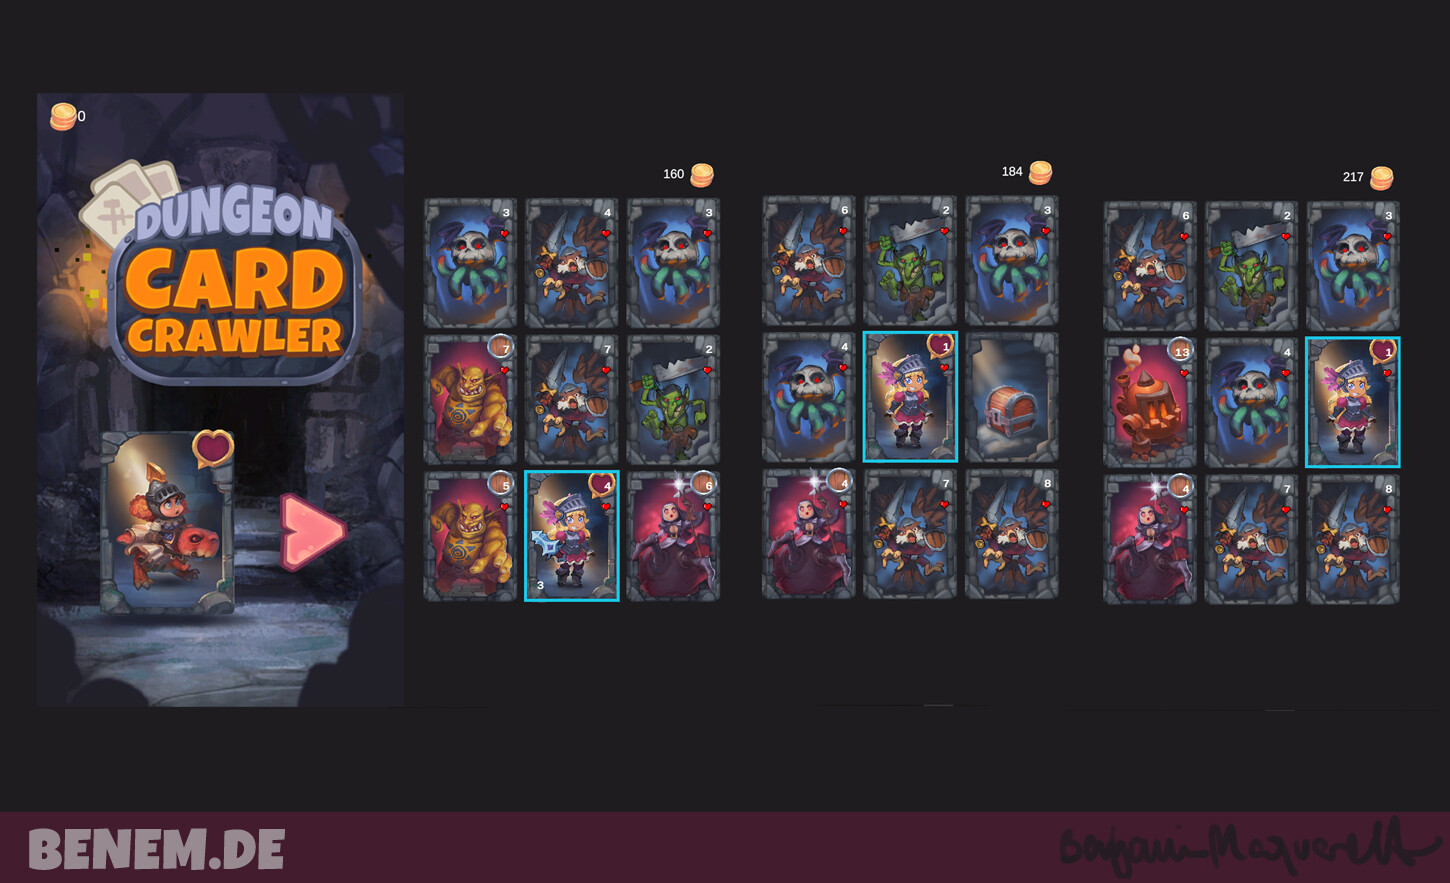 For this Project I bought this template from the unity asset store:


https://assetstore.unity.com/packages/templates/packs/mobile-card-dungeon-crawler-137605